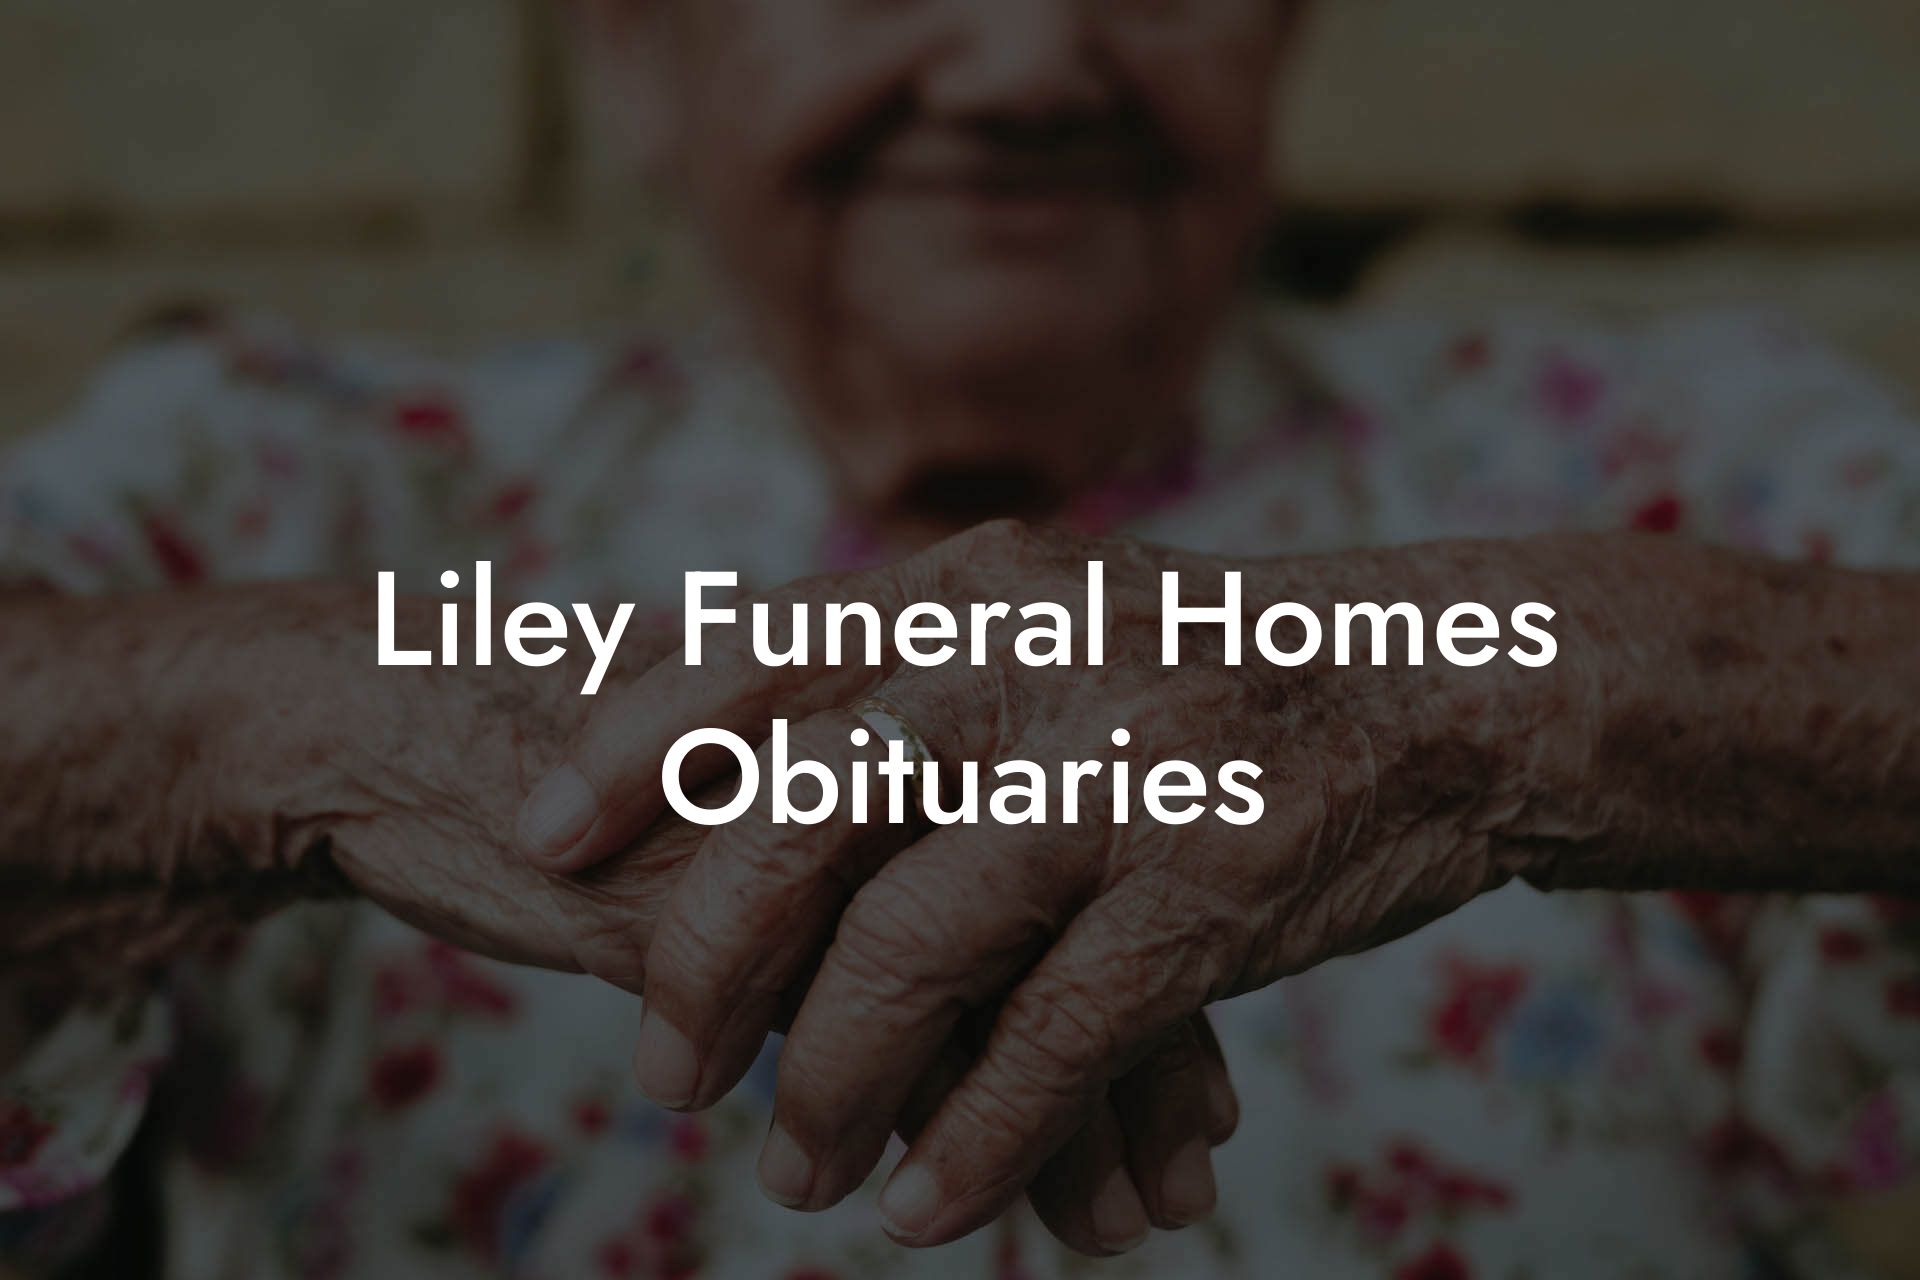 Liley Funeral Homes Obituaries